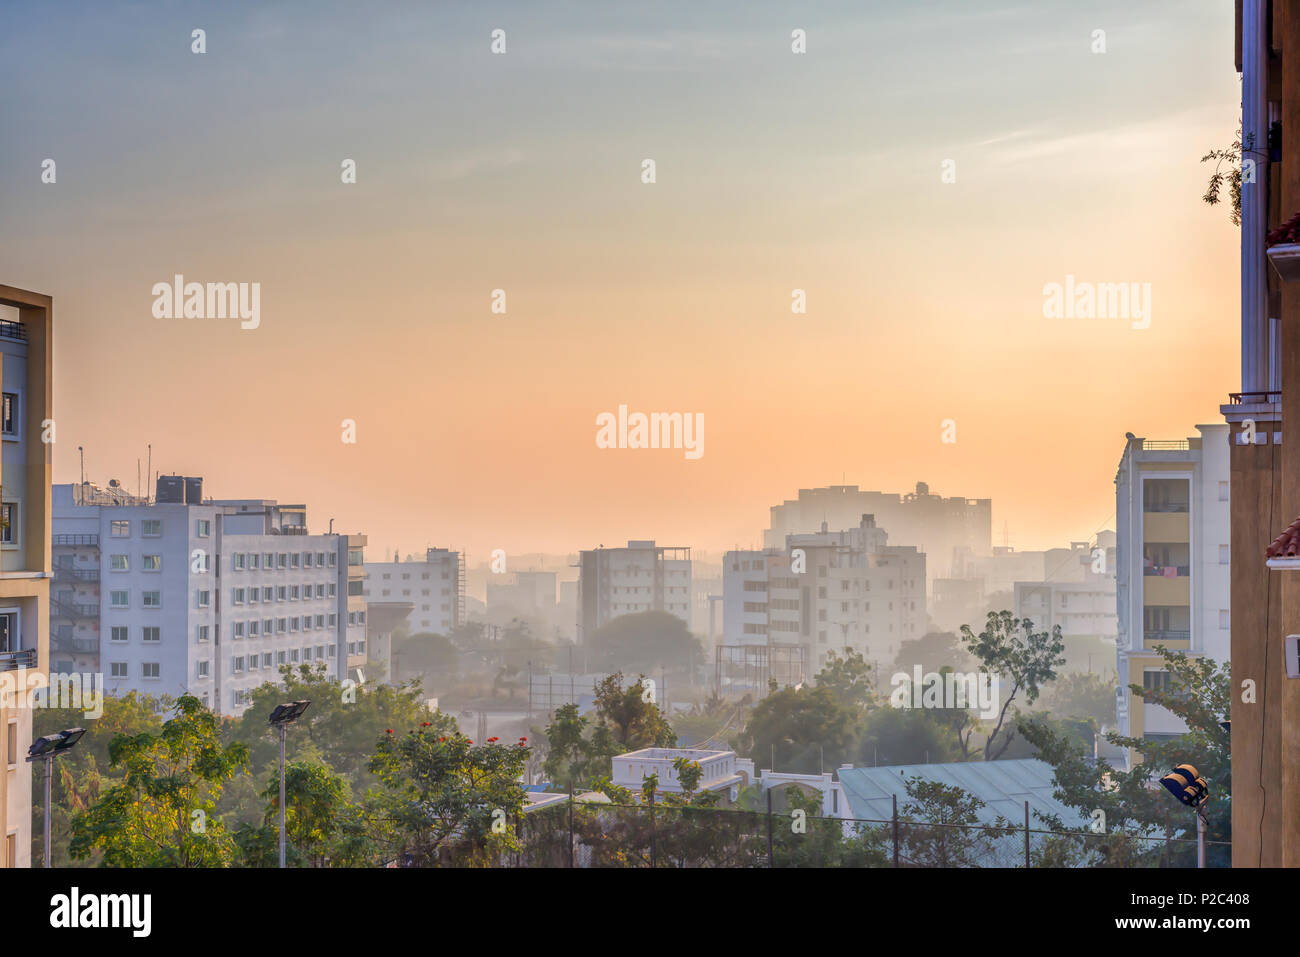 The cityscape and landscape of Kondapur and Hi-Tech city, Hyderabad, Telangana, India, under a shroud of early morning mist, late December. Stock Photo